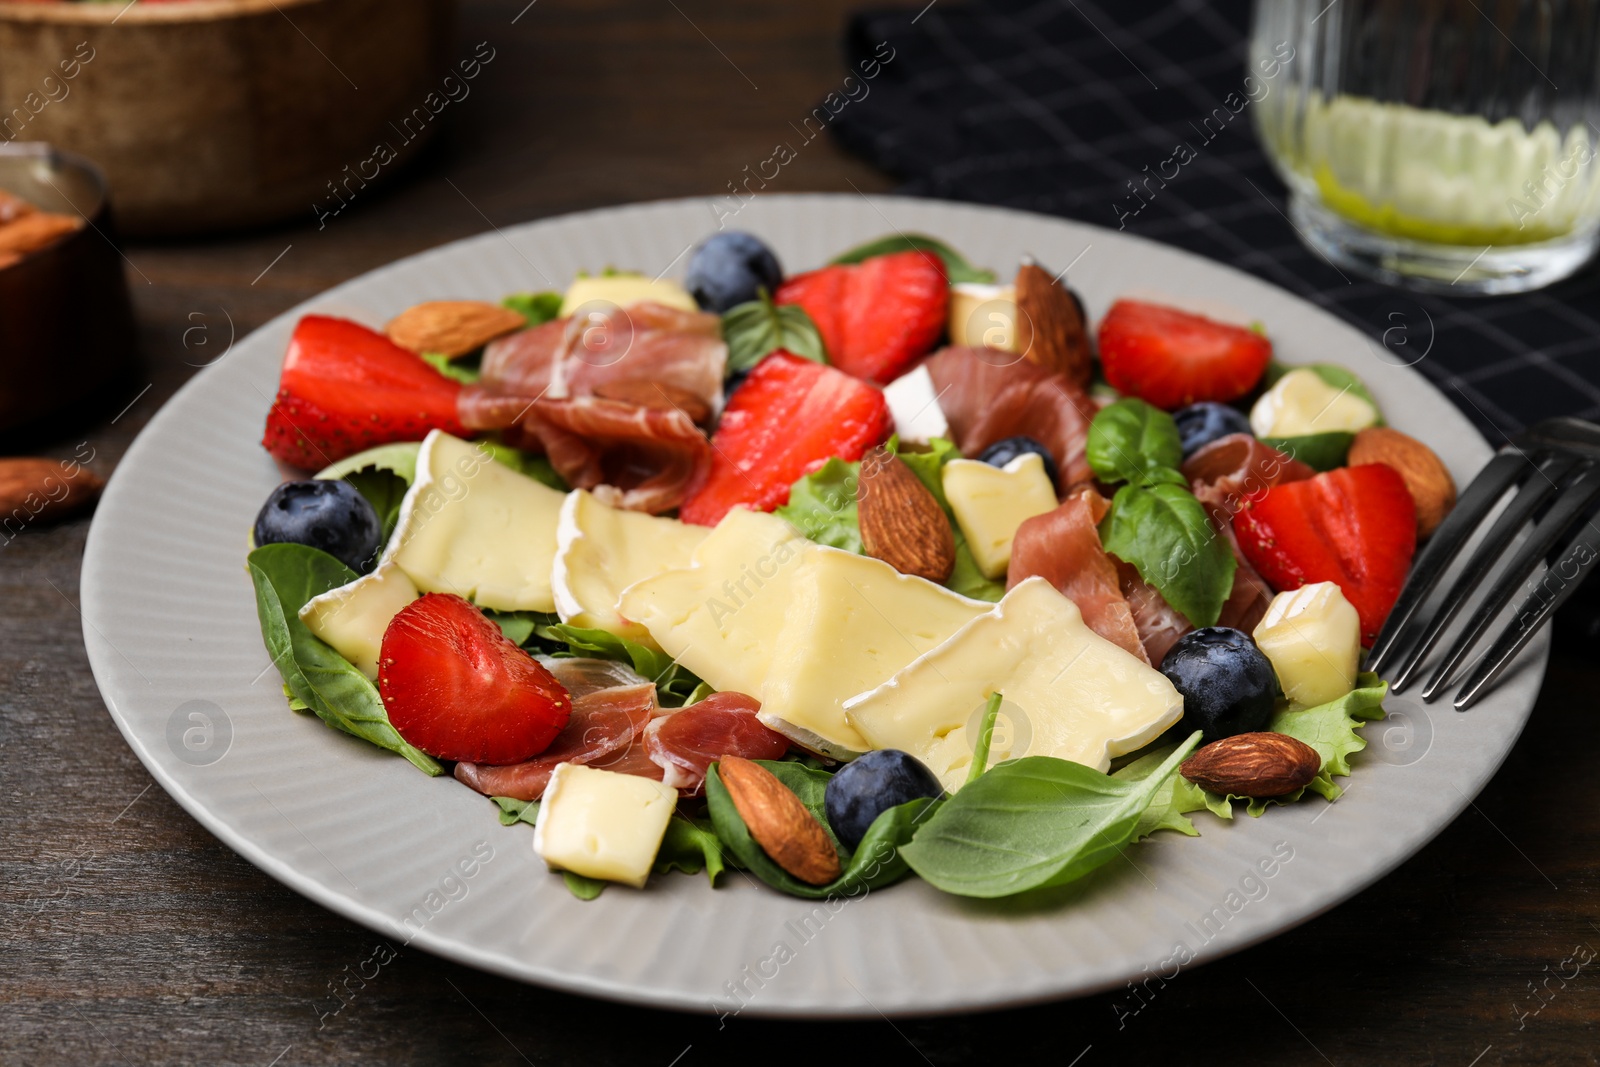 Photo of Tasty salad with brie cheese, prosciutto, almonds and berries on wooden table, closeup